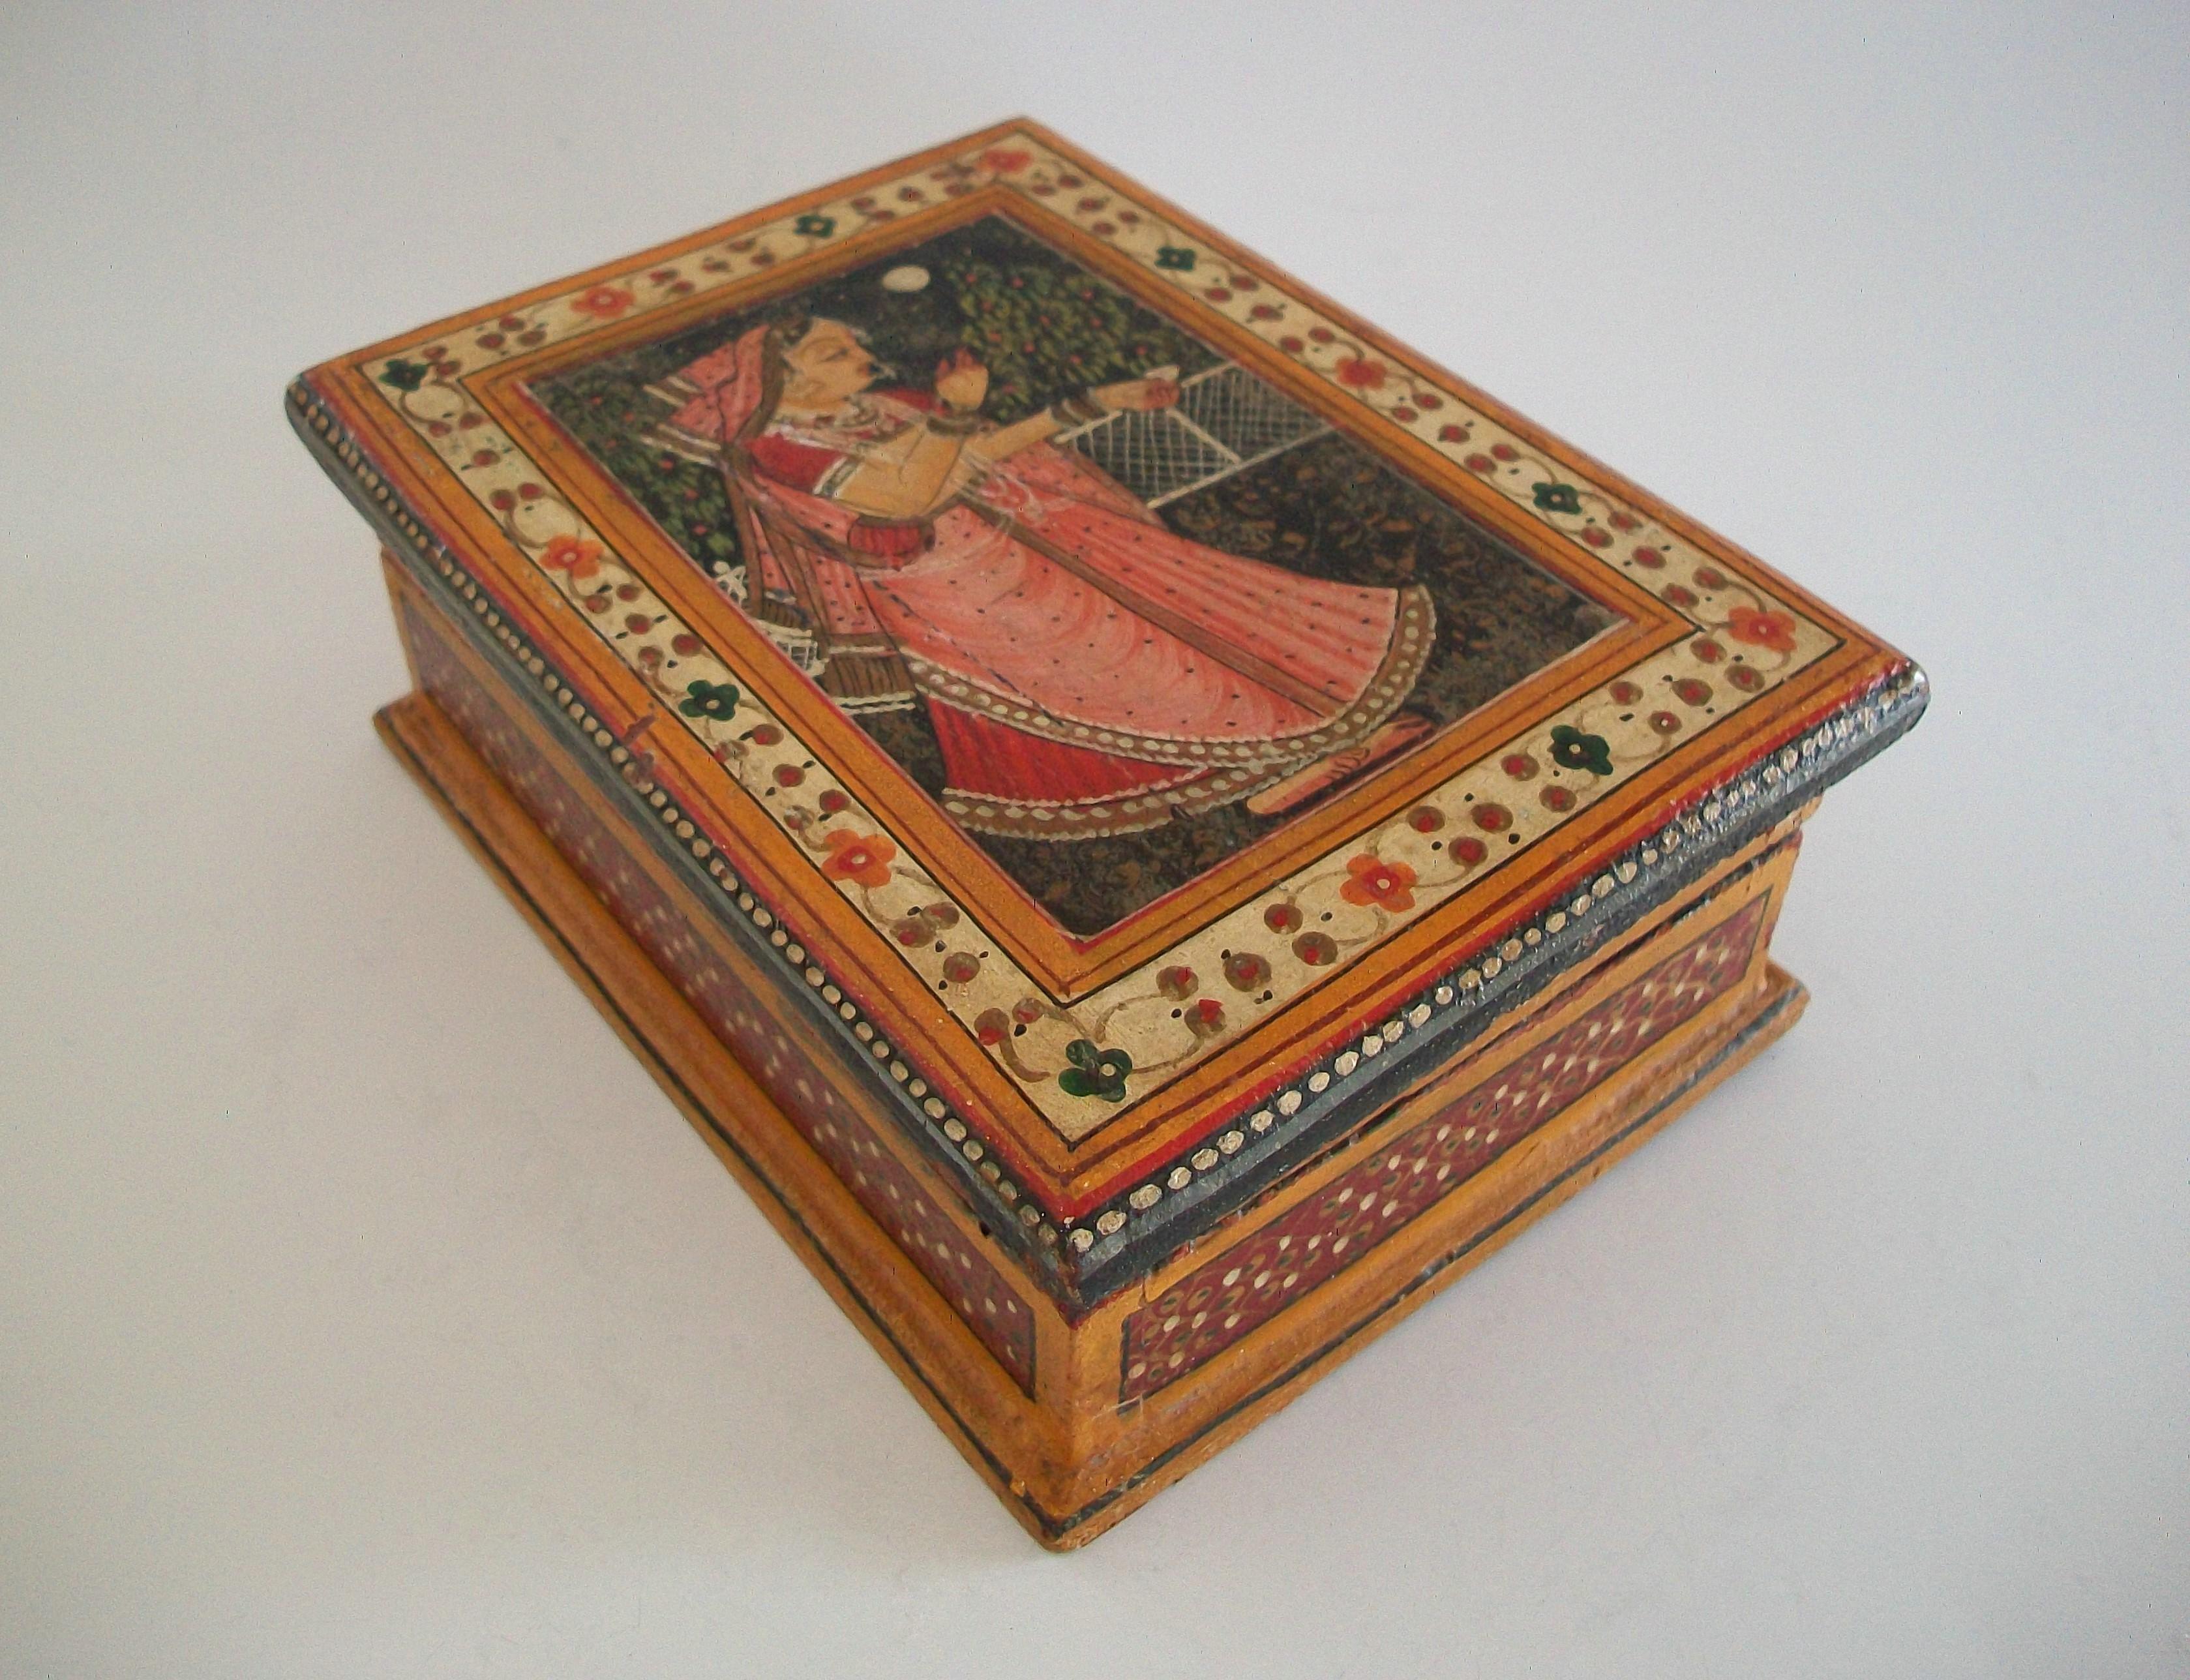 Anglo-Indian Vintage South Asian Folk Art Hand Painted Wooden Box - India - Mid 20th Century For Sale